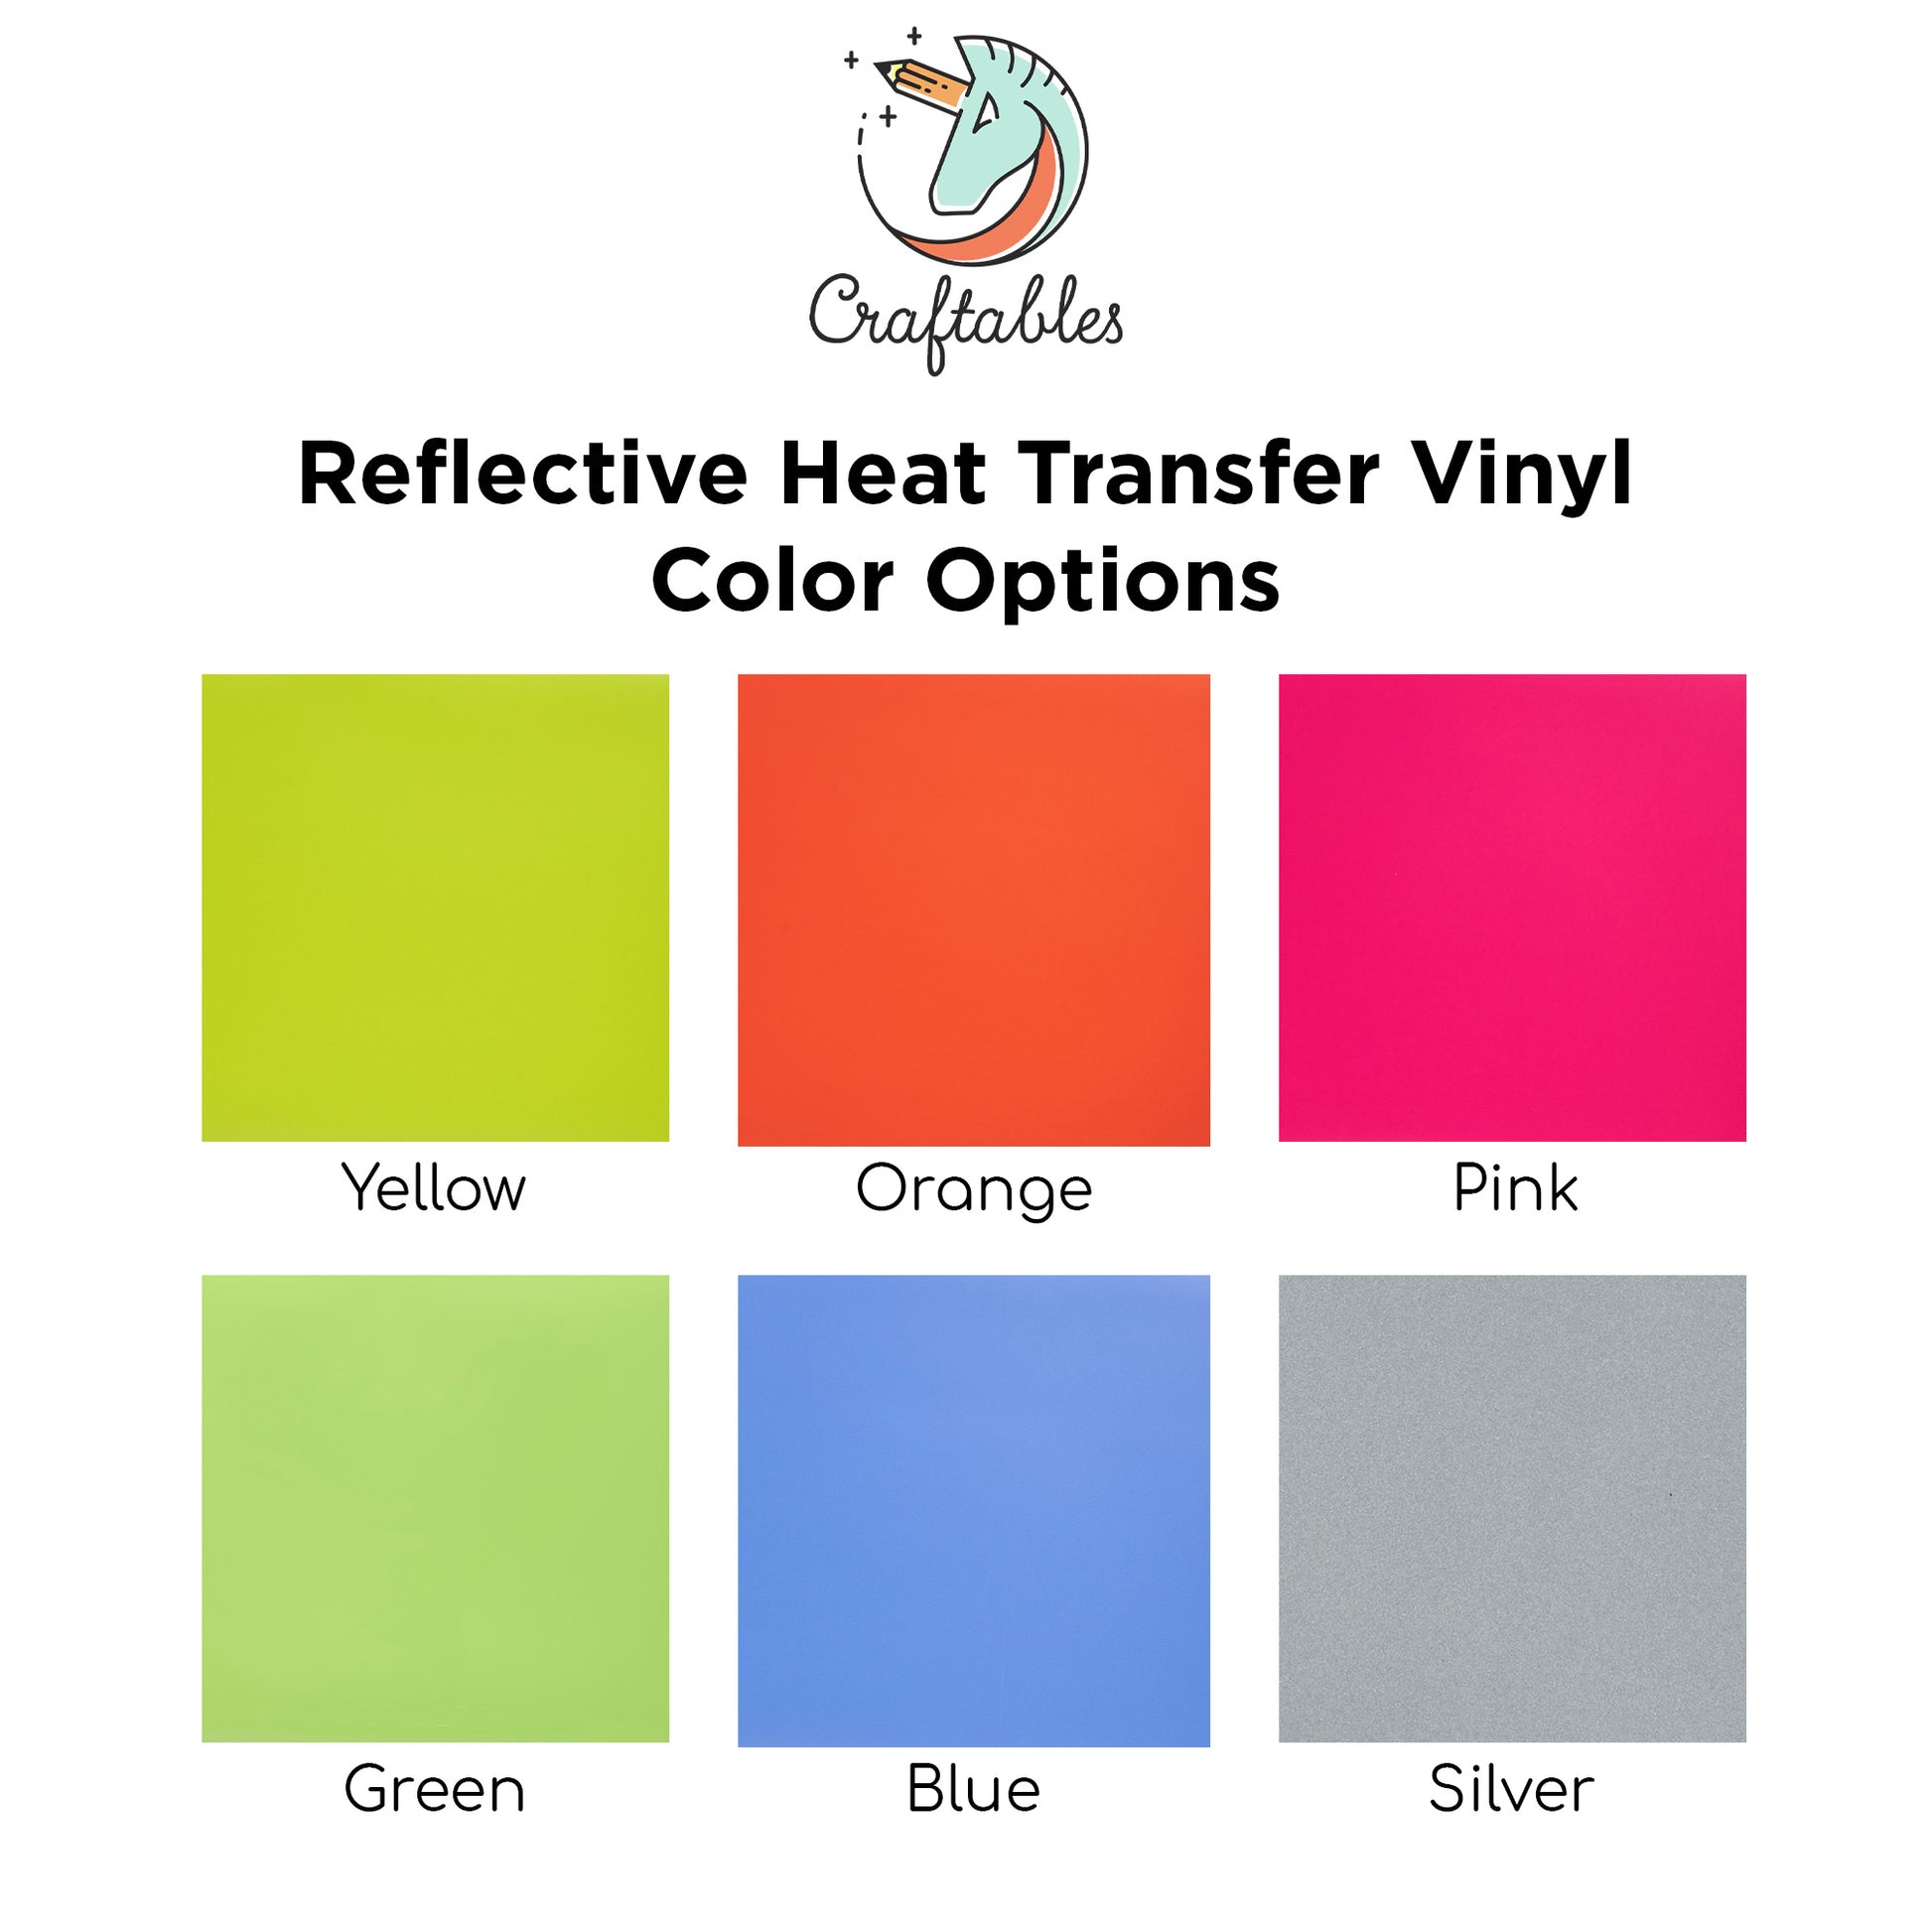 White Silicone Heat Transfer Vinyl Sheets By Craftables – shopcraftables